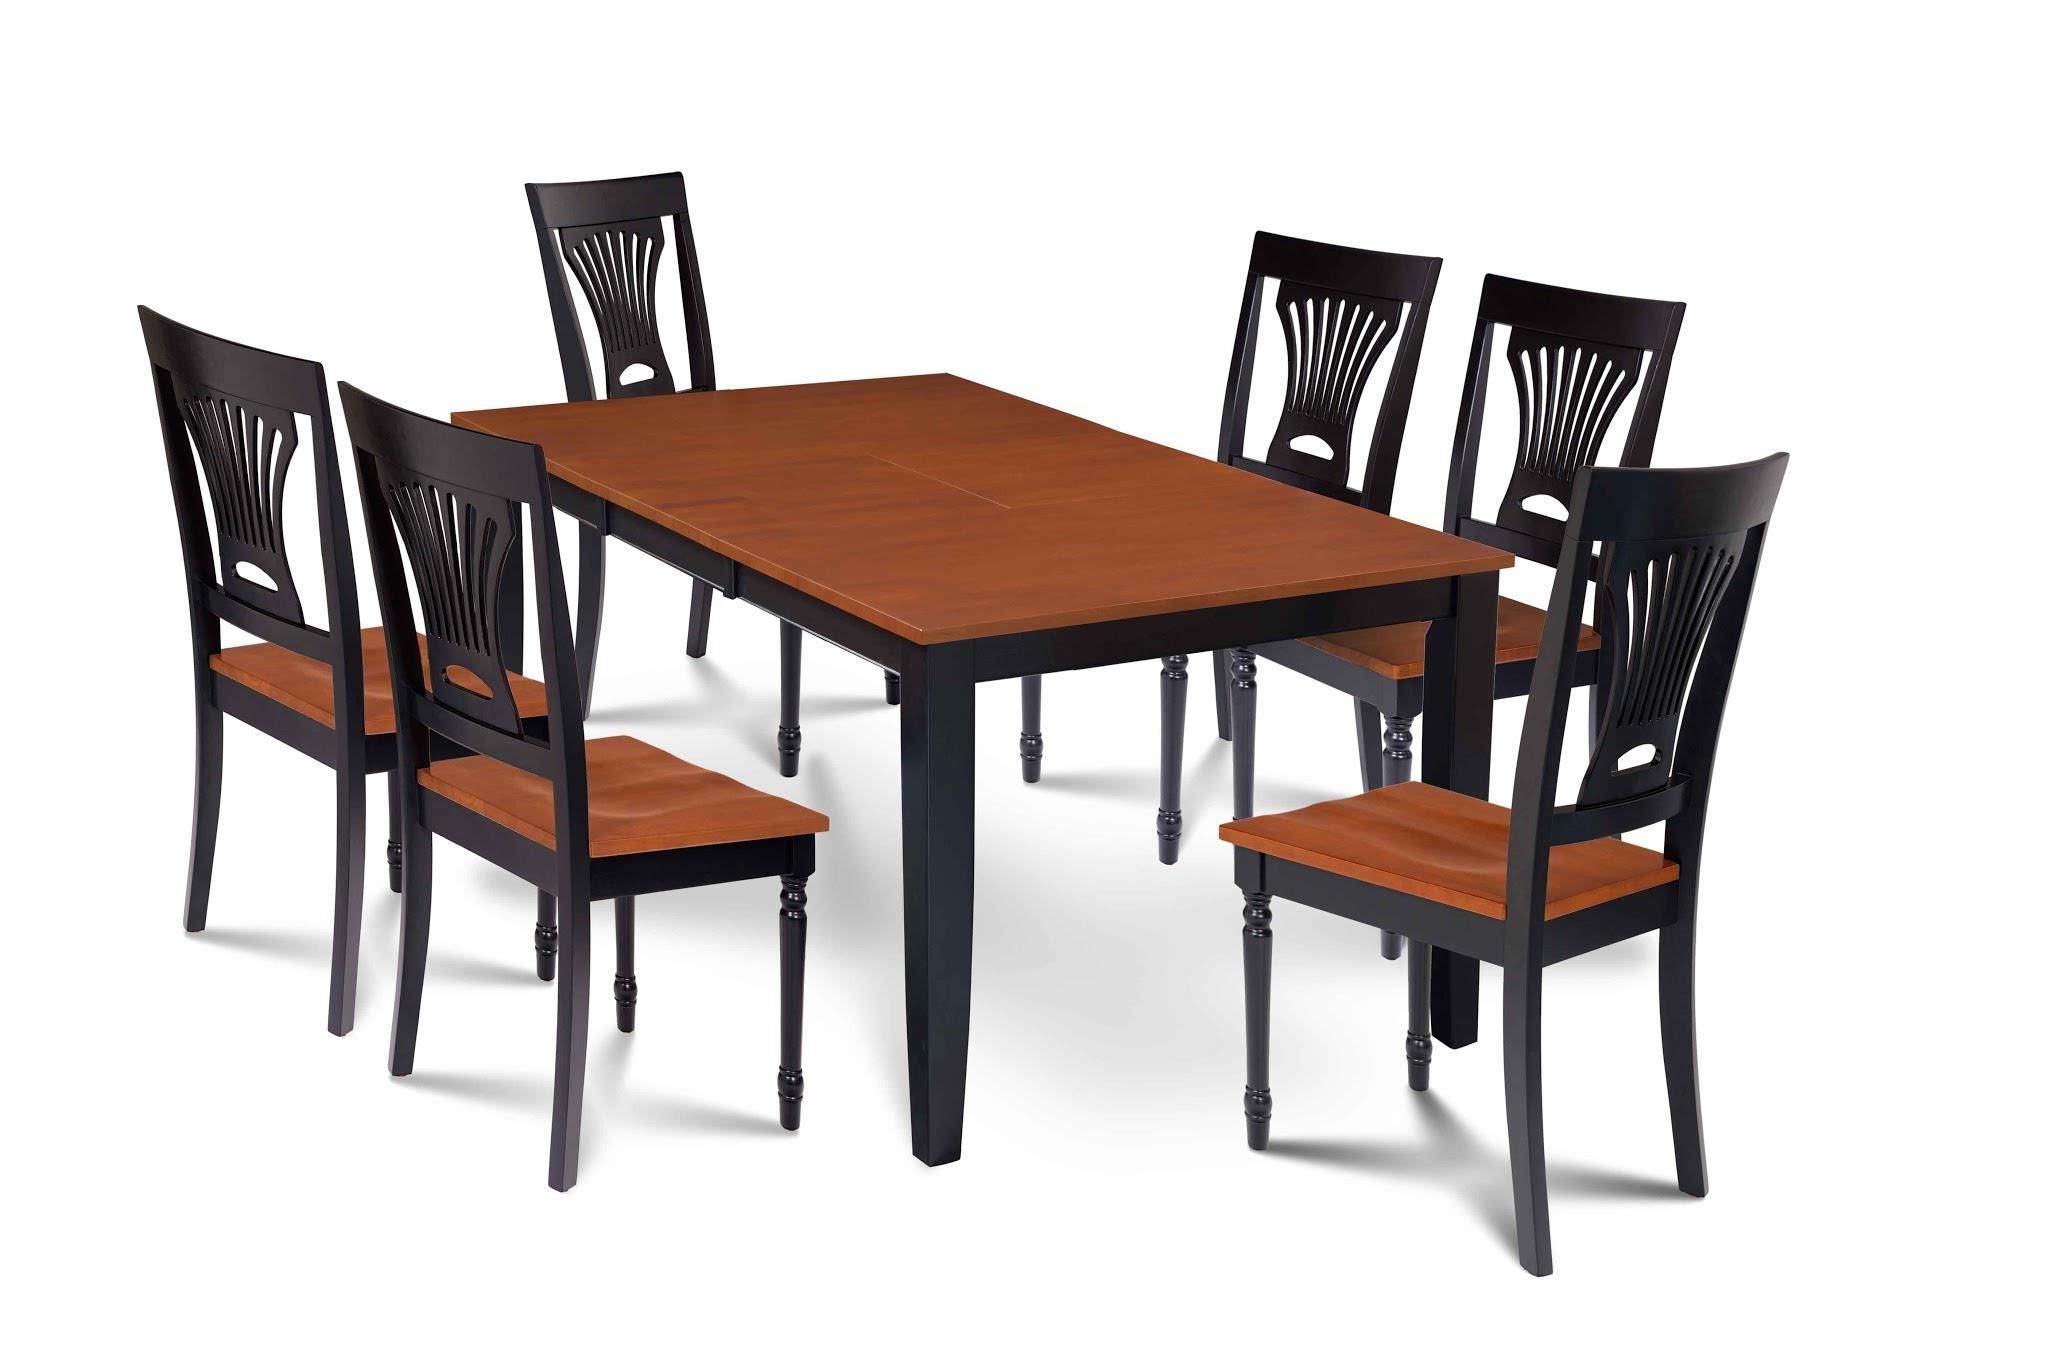 Black Medium Rectangle Patio Dining Sets With Regard To Widely Used 7 Piece Dining Room Set Table With A Butterfly Leaf And 6 Dining Chairs (View 6 of 15)